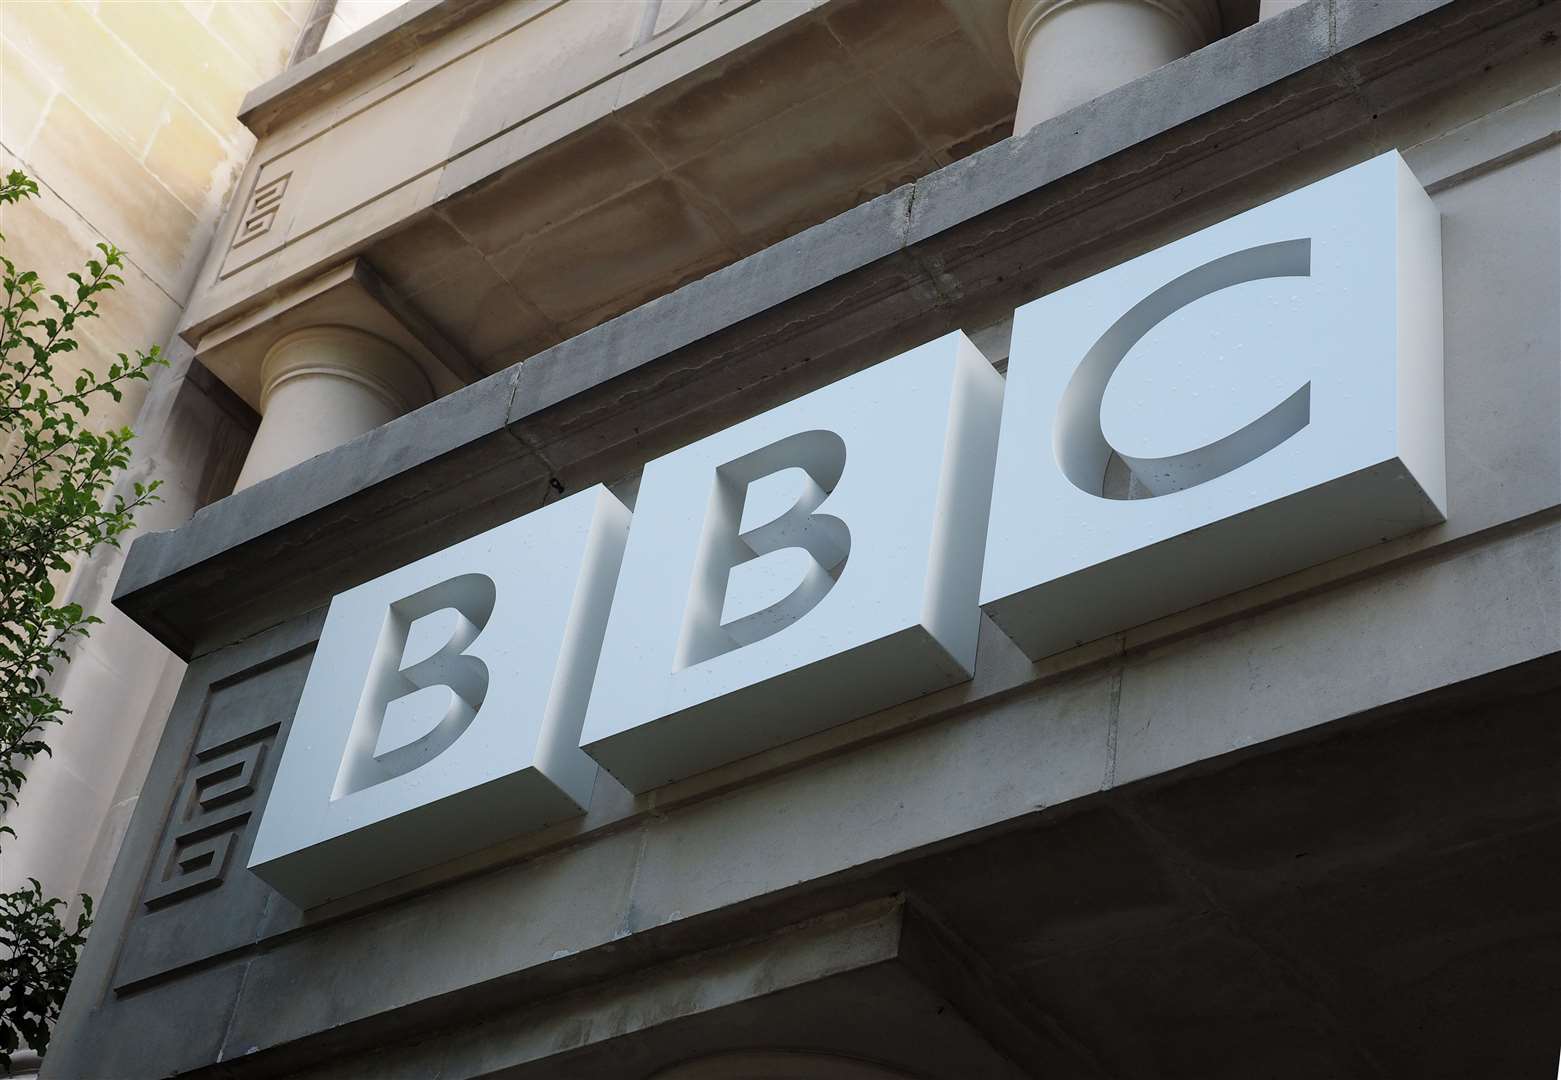 The BBC is a public broadcaster governed by a Royal Charter.